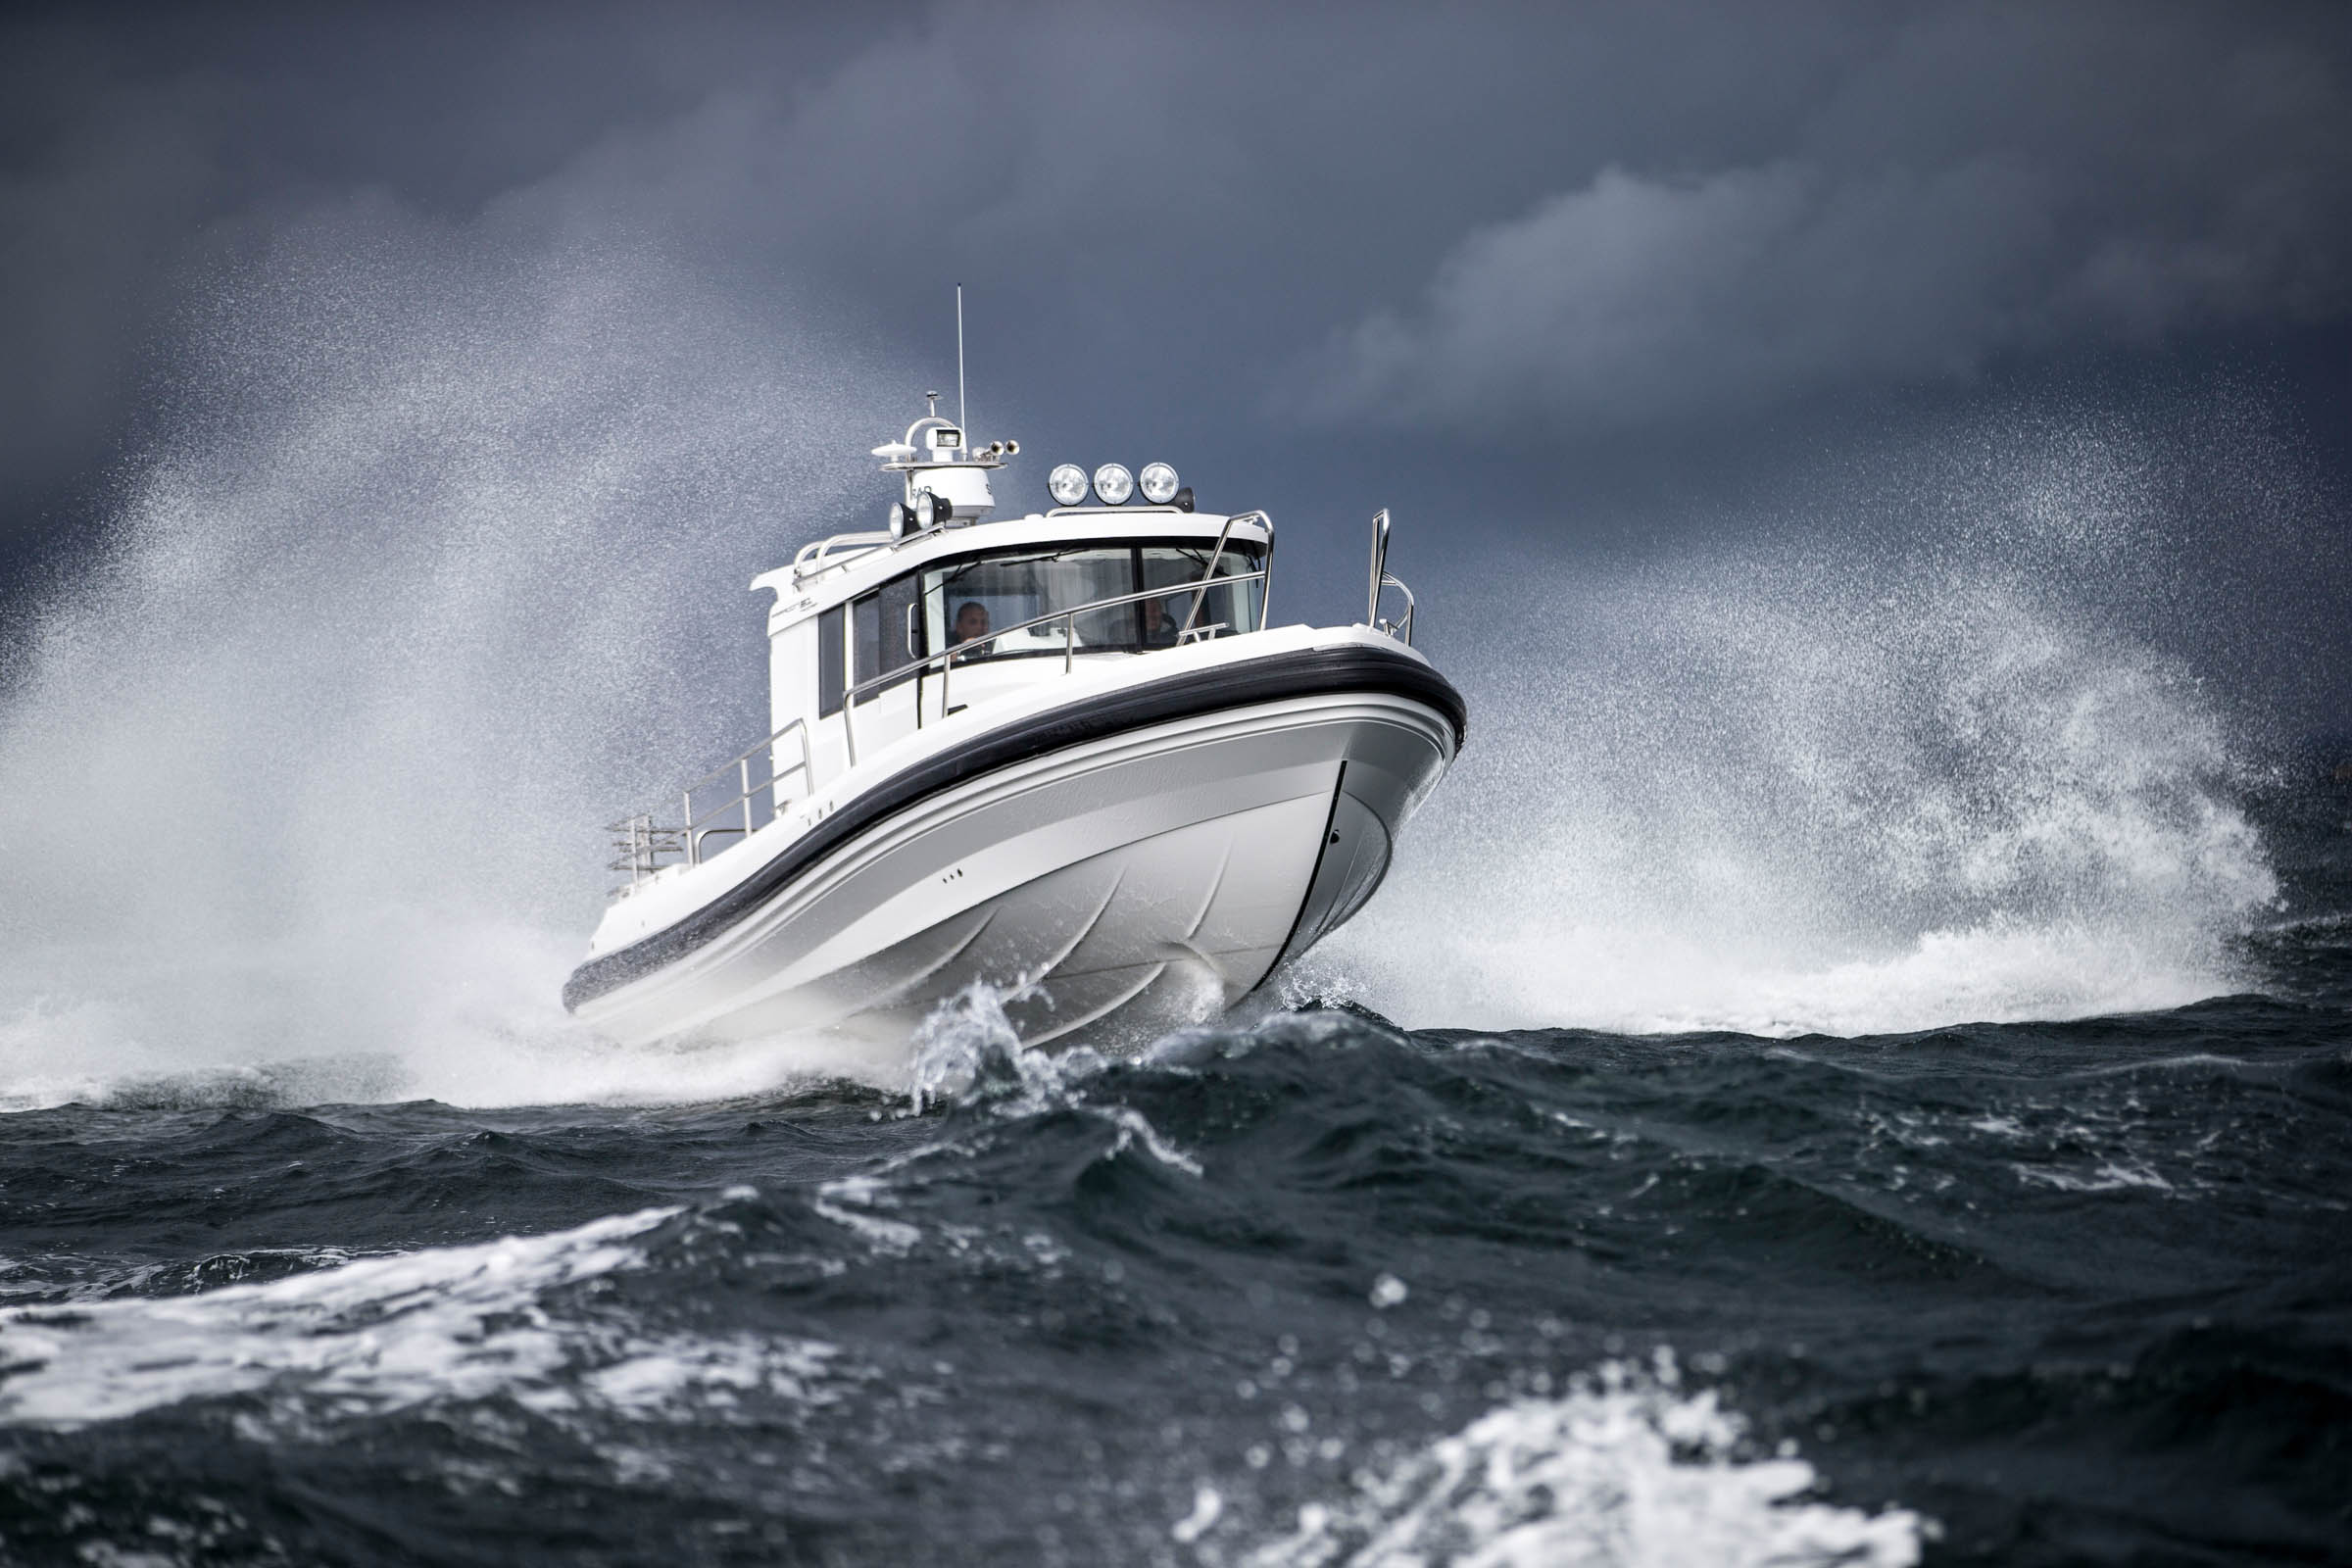 Paragon 31 Cabin is driving on the sea with waves